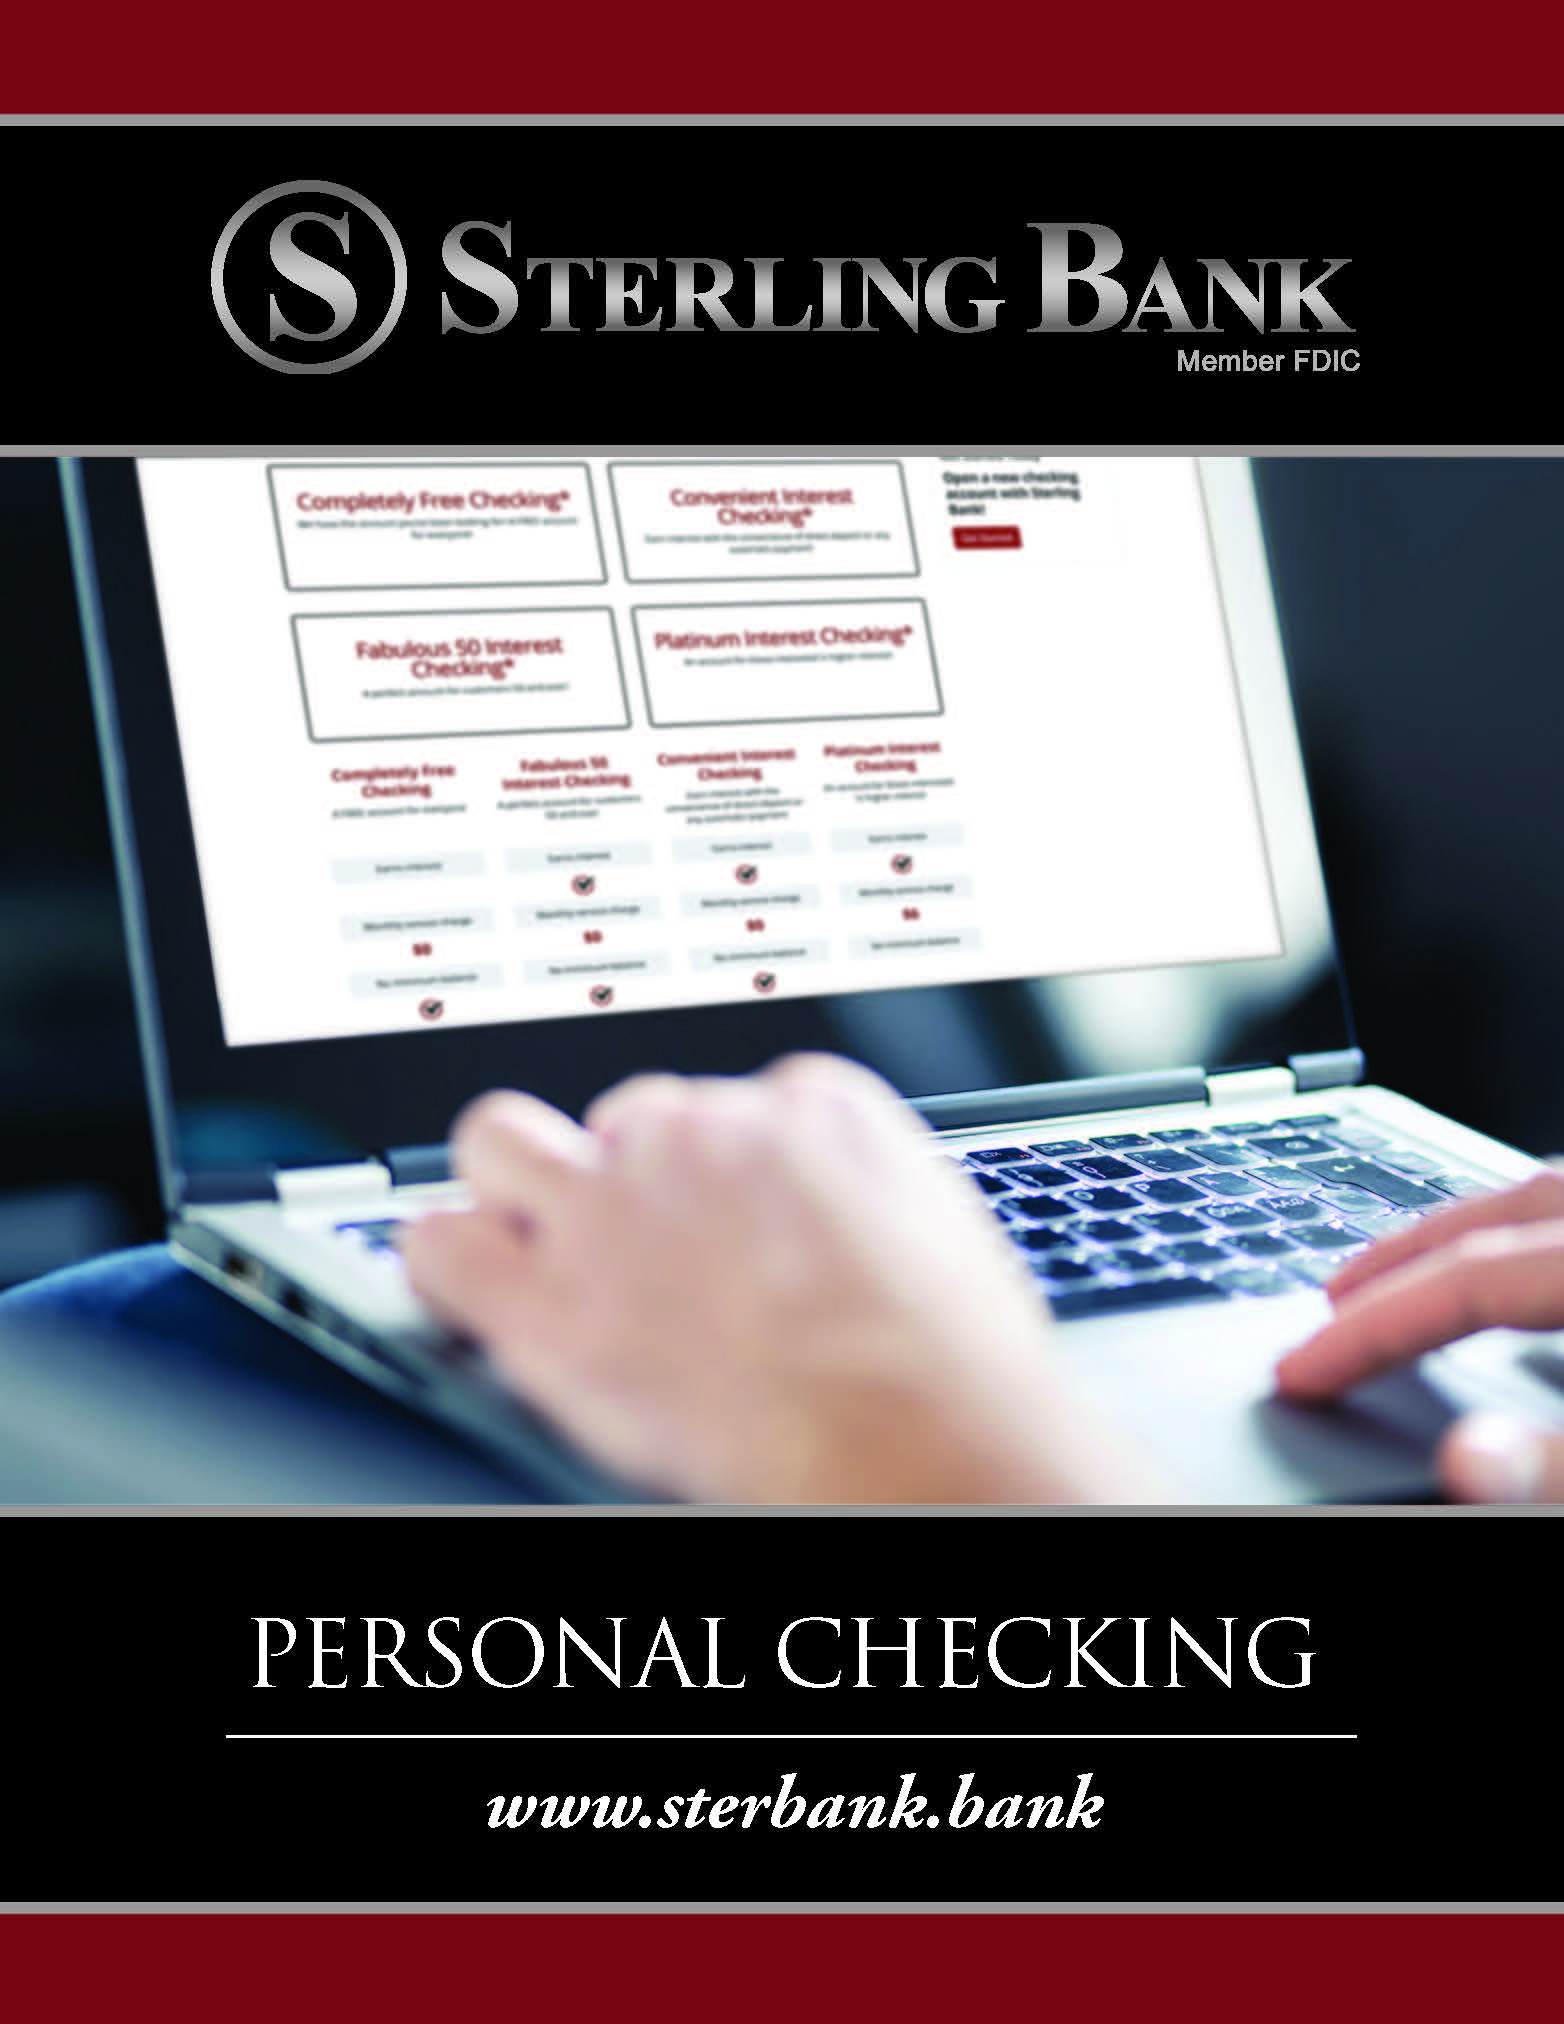 Personal Checking Brochure